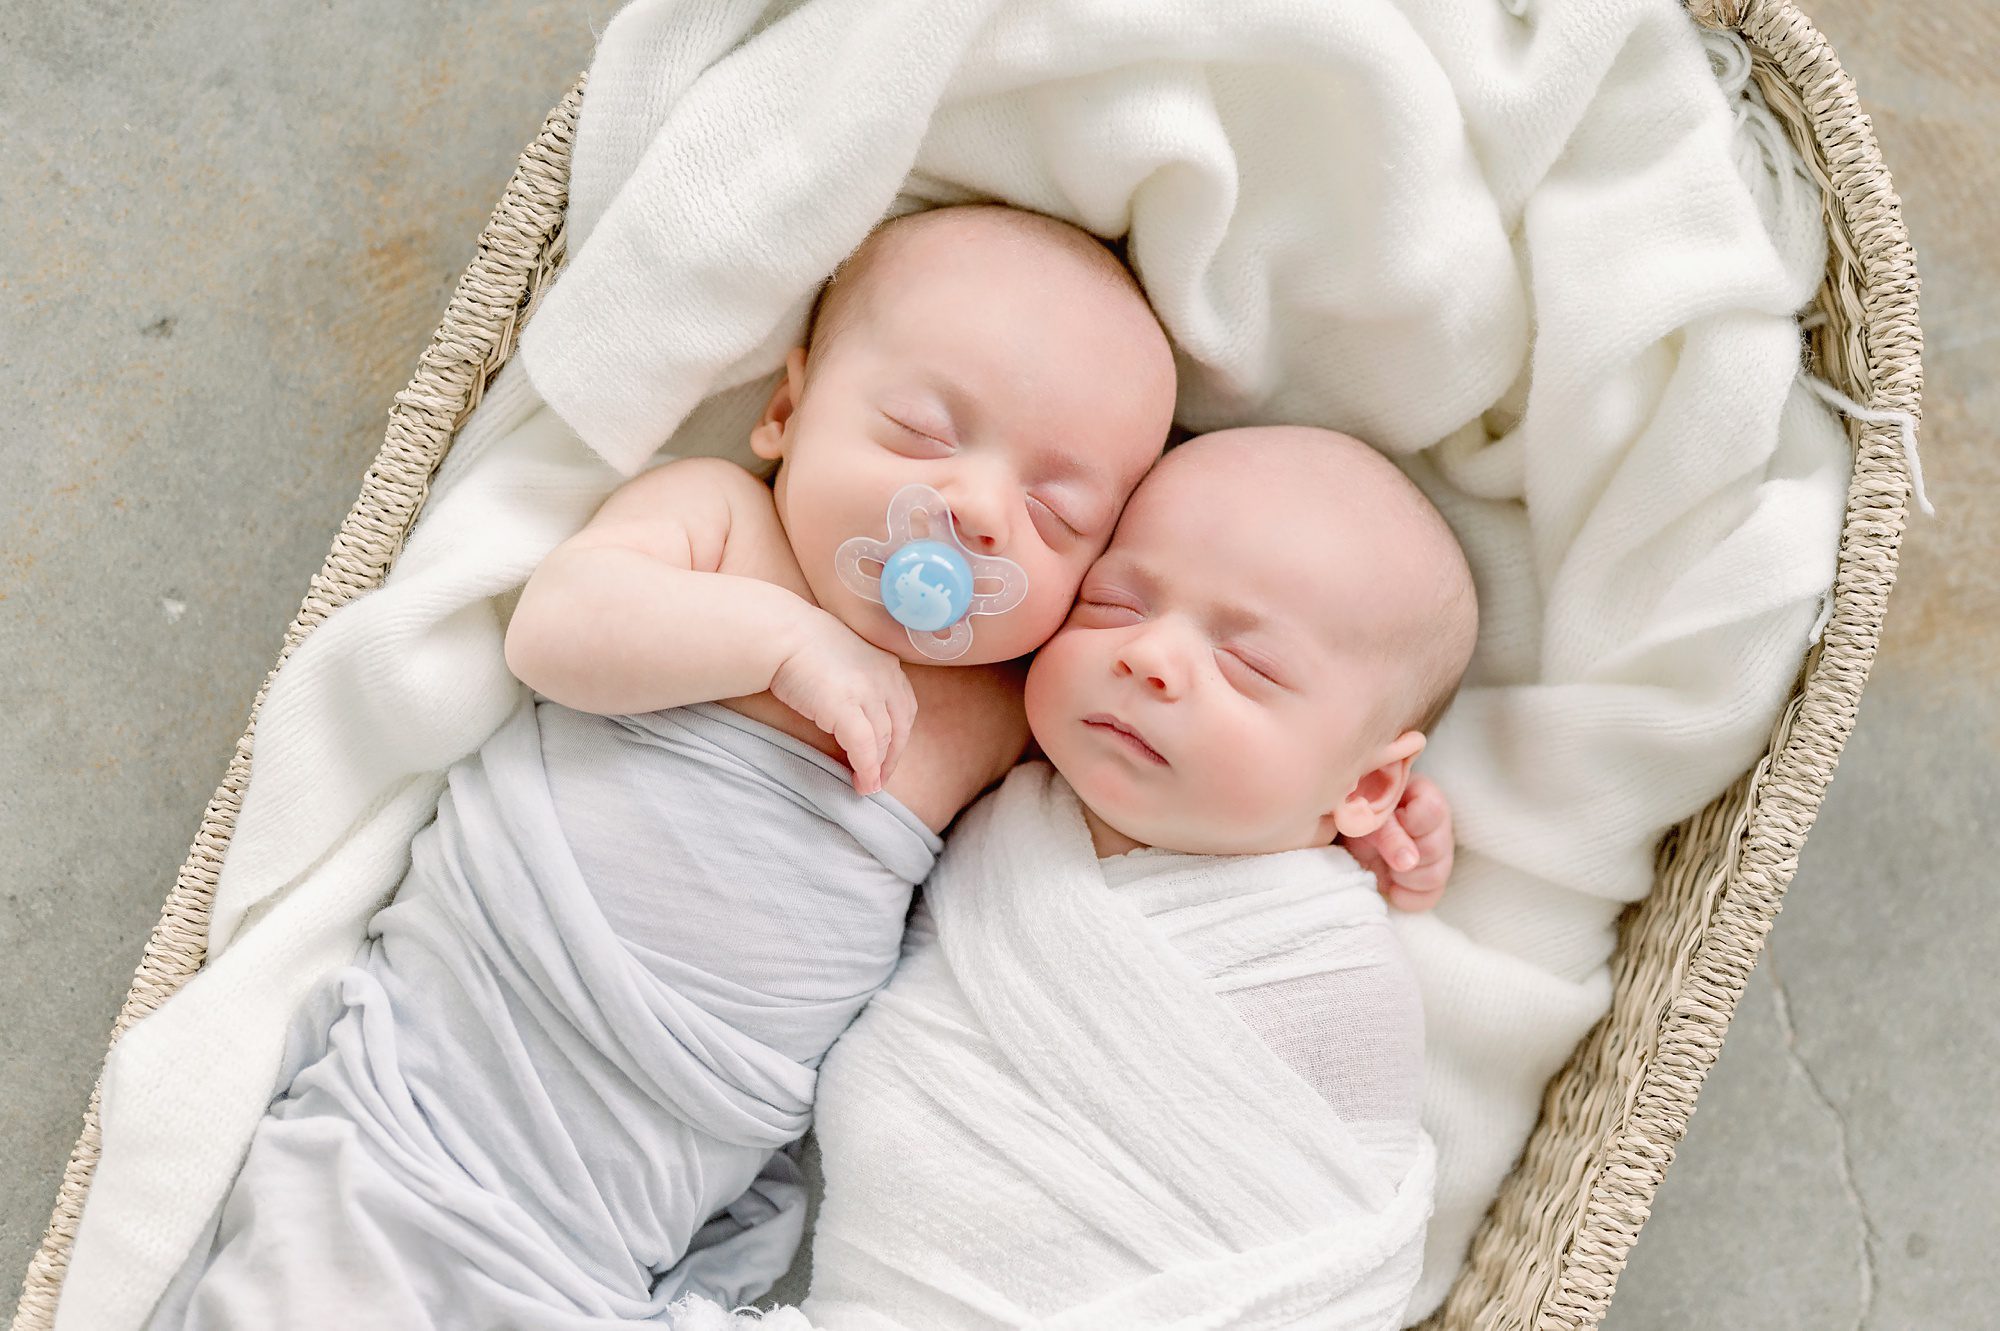 A family of five with newborn twin boys gets family photos done in a bright white studio in Denver Colorado with their older son.